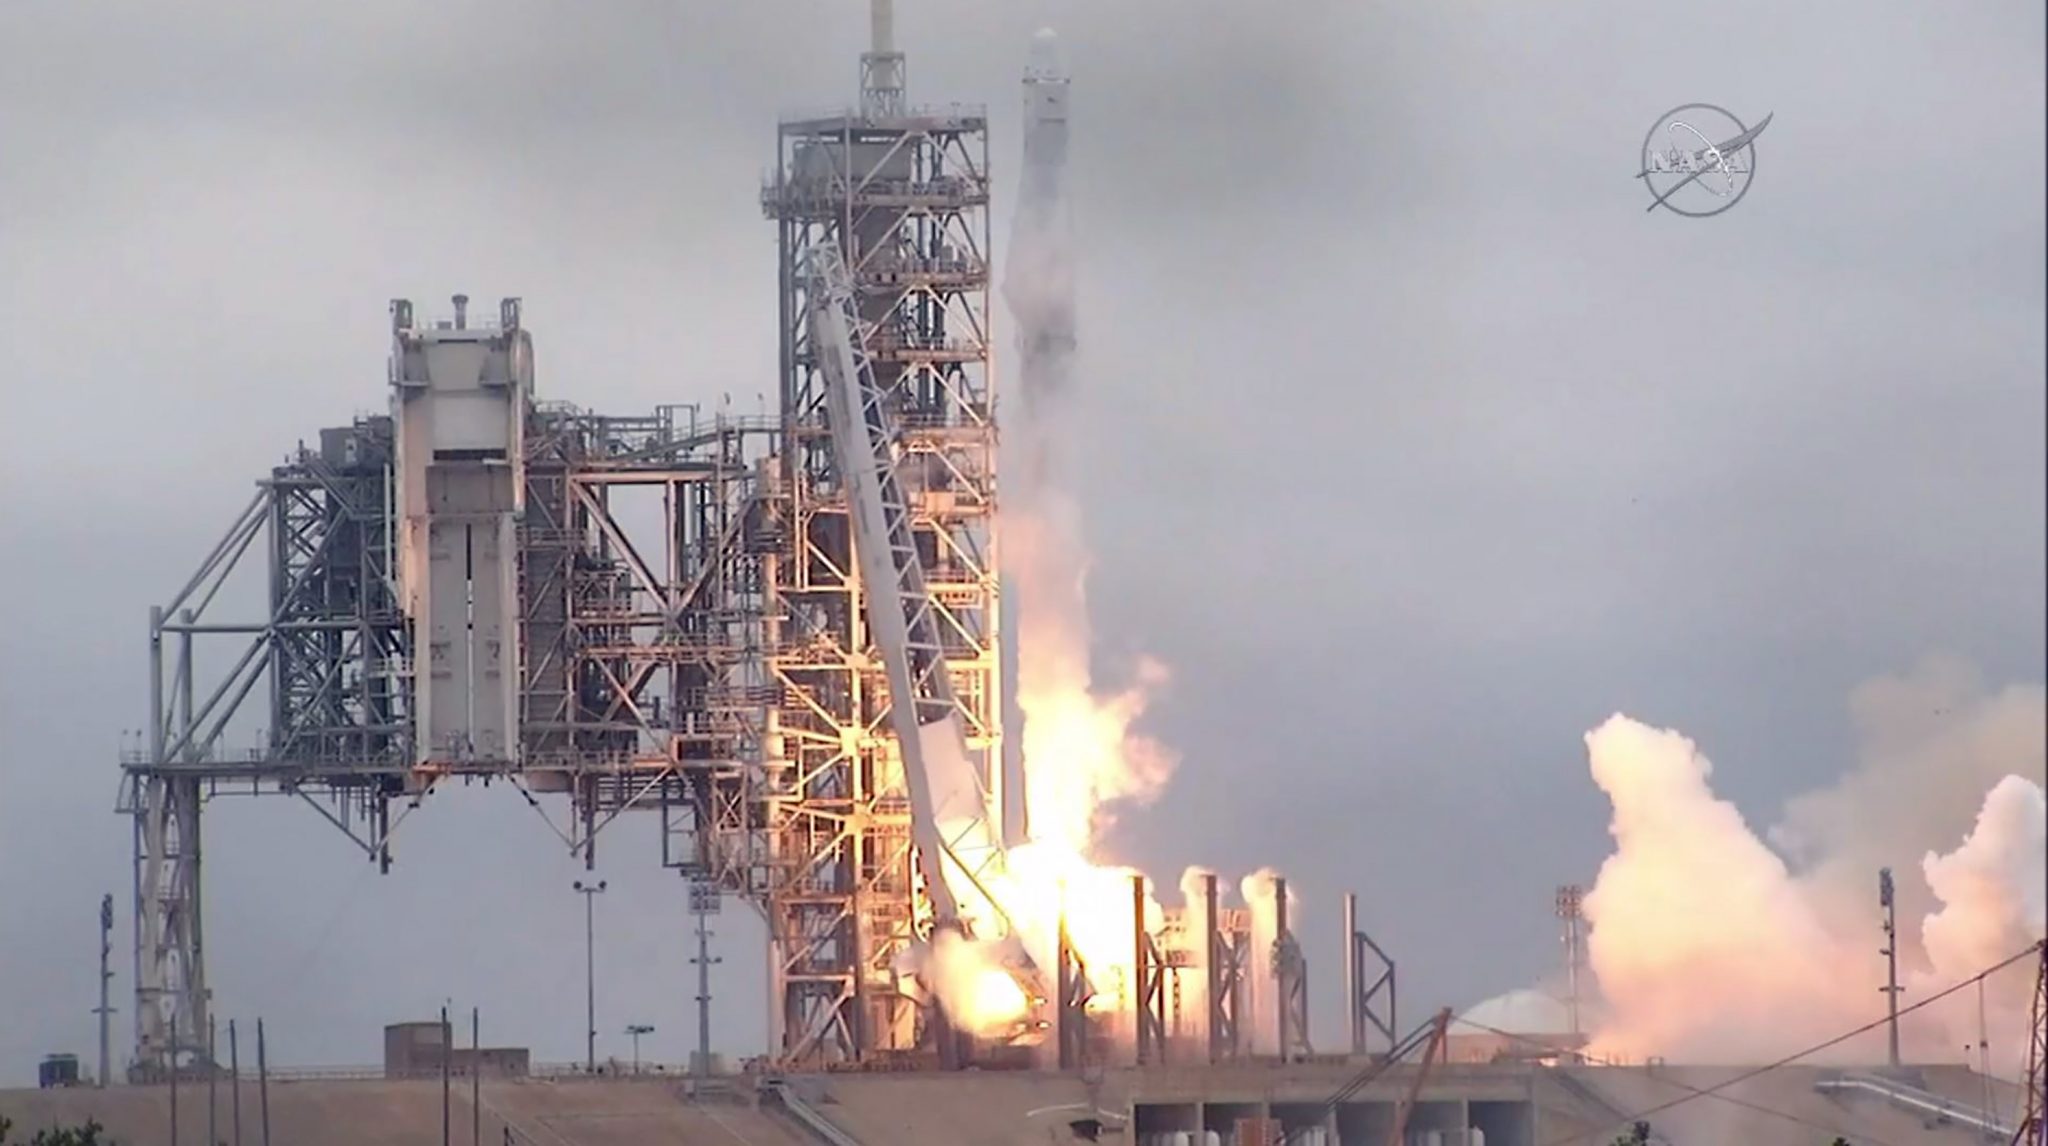 This still image taken from NASA TV, shows the the SpaceX Falcon 9 rocket, carrying a Dragon cargo capsule, launching from the Kennedy Space Center Launch Complex 39A in Florida on February 19, 2017. The current resupply mission is the 10th of up to 20 planned trips to the International Space Station. The unmanned cargo capsule is packed with more than 5,000 pounds (2,267 kilograms) of food, gear and science experiments. Launchpad 39A was used for the Apollo and space shuttle launches. / AFP PHOTO / NASA / HO / RESTRICTED TO EDITORIAL USE - MANDATORY CREDIT "AFP PHOTO / NASA" - NO MARKETING NO ADVERTISING CAMPAIGNS - DISTRIBUTED AS A SERVICE TO CLIENTS